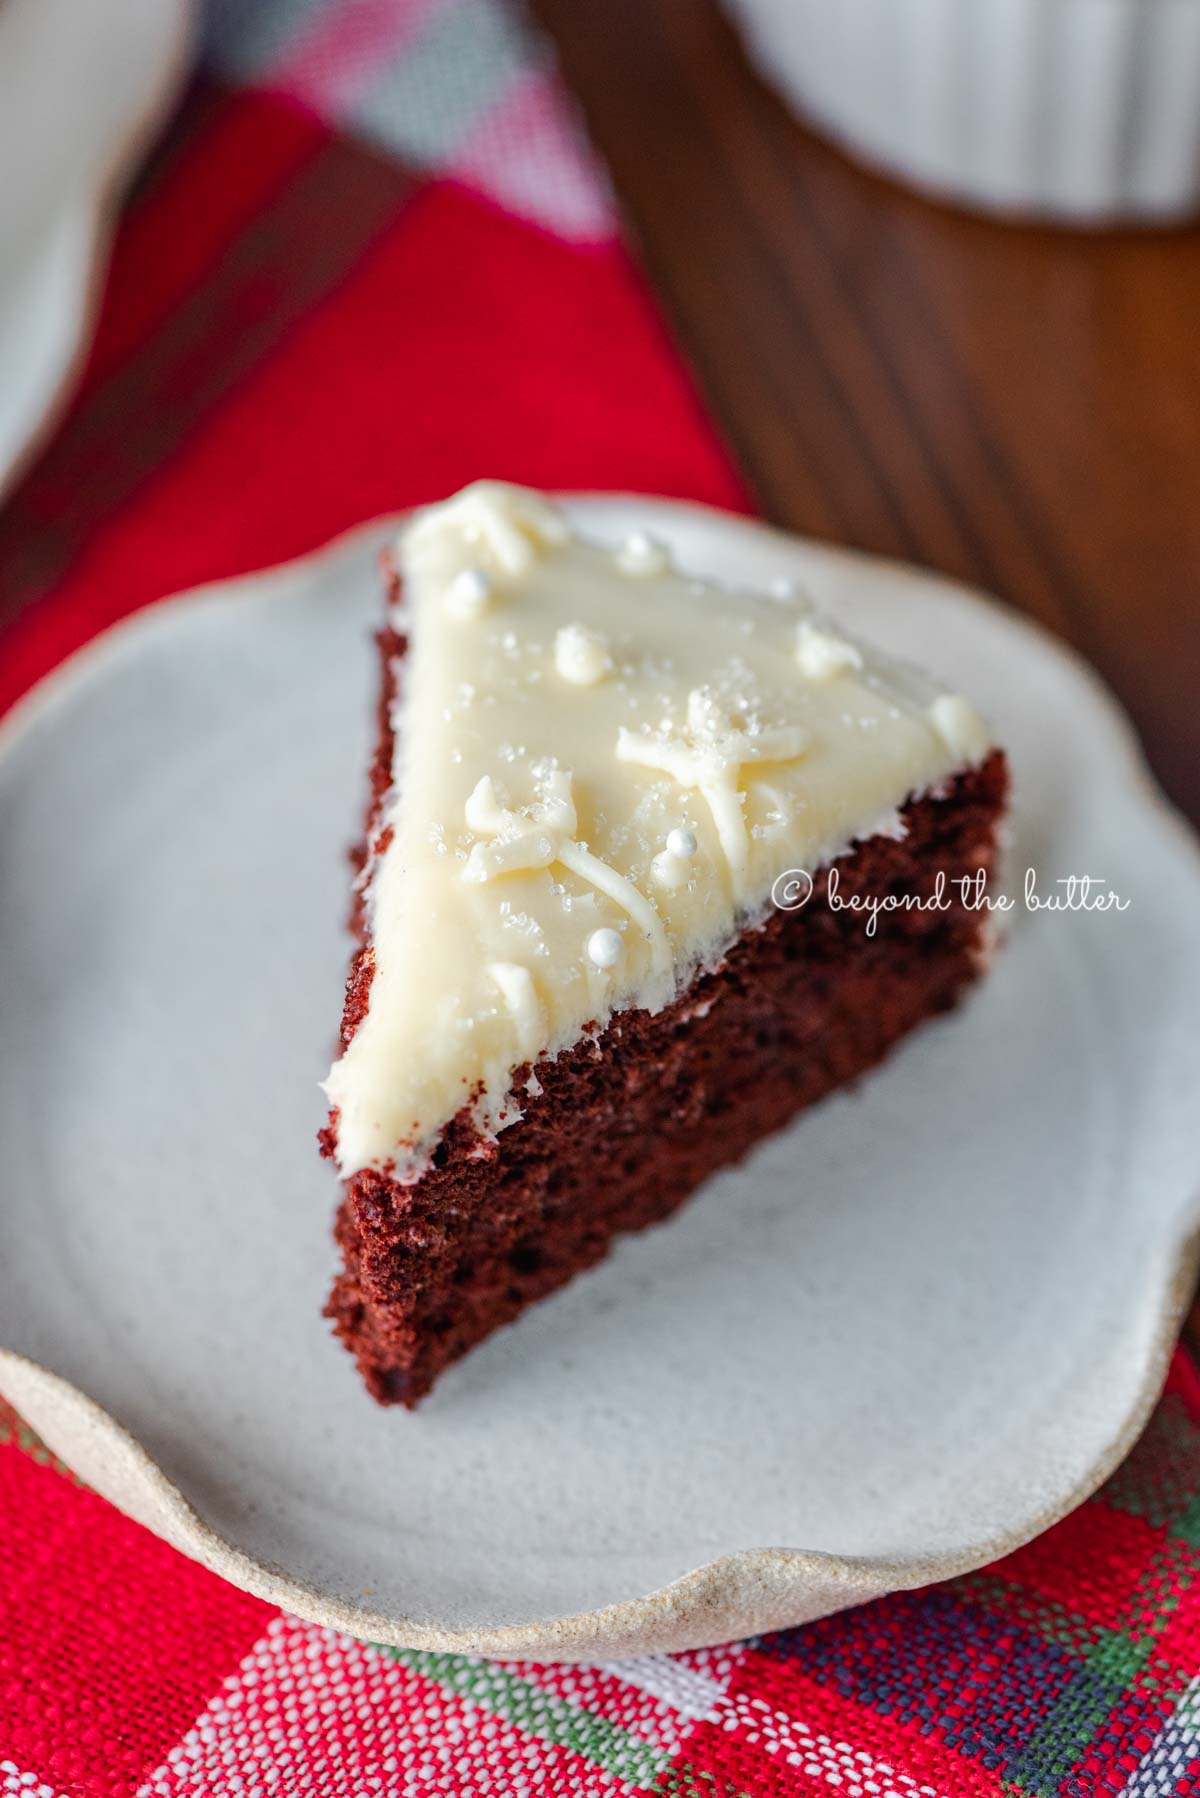 Slice of red velvet cake with cream cheese frosting on a scalloped edge dessert plate with red plaid background | All Images © Beyond the Butter®